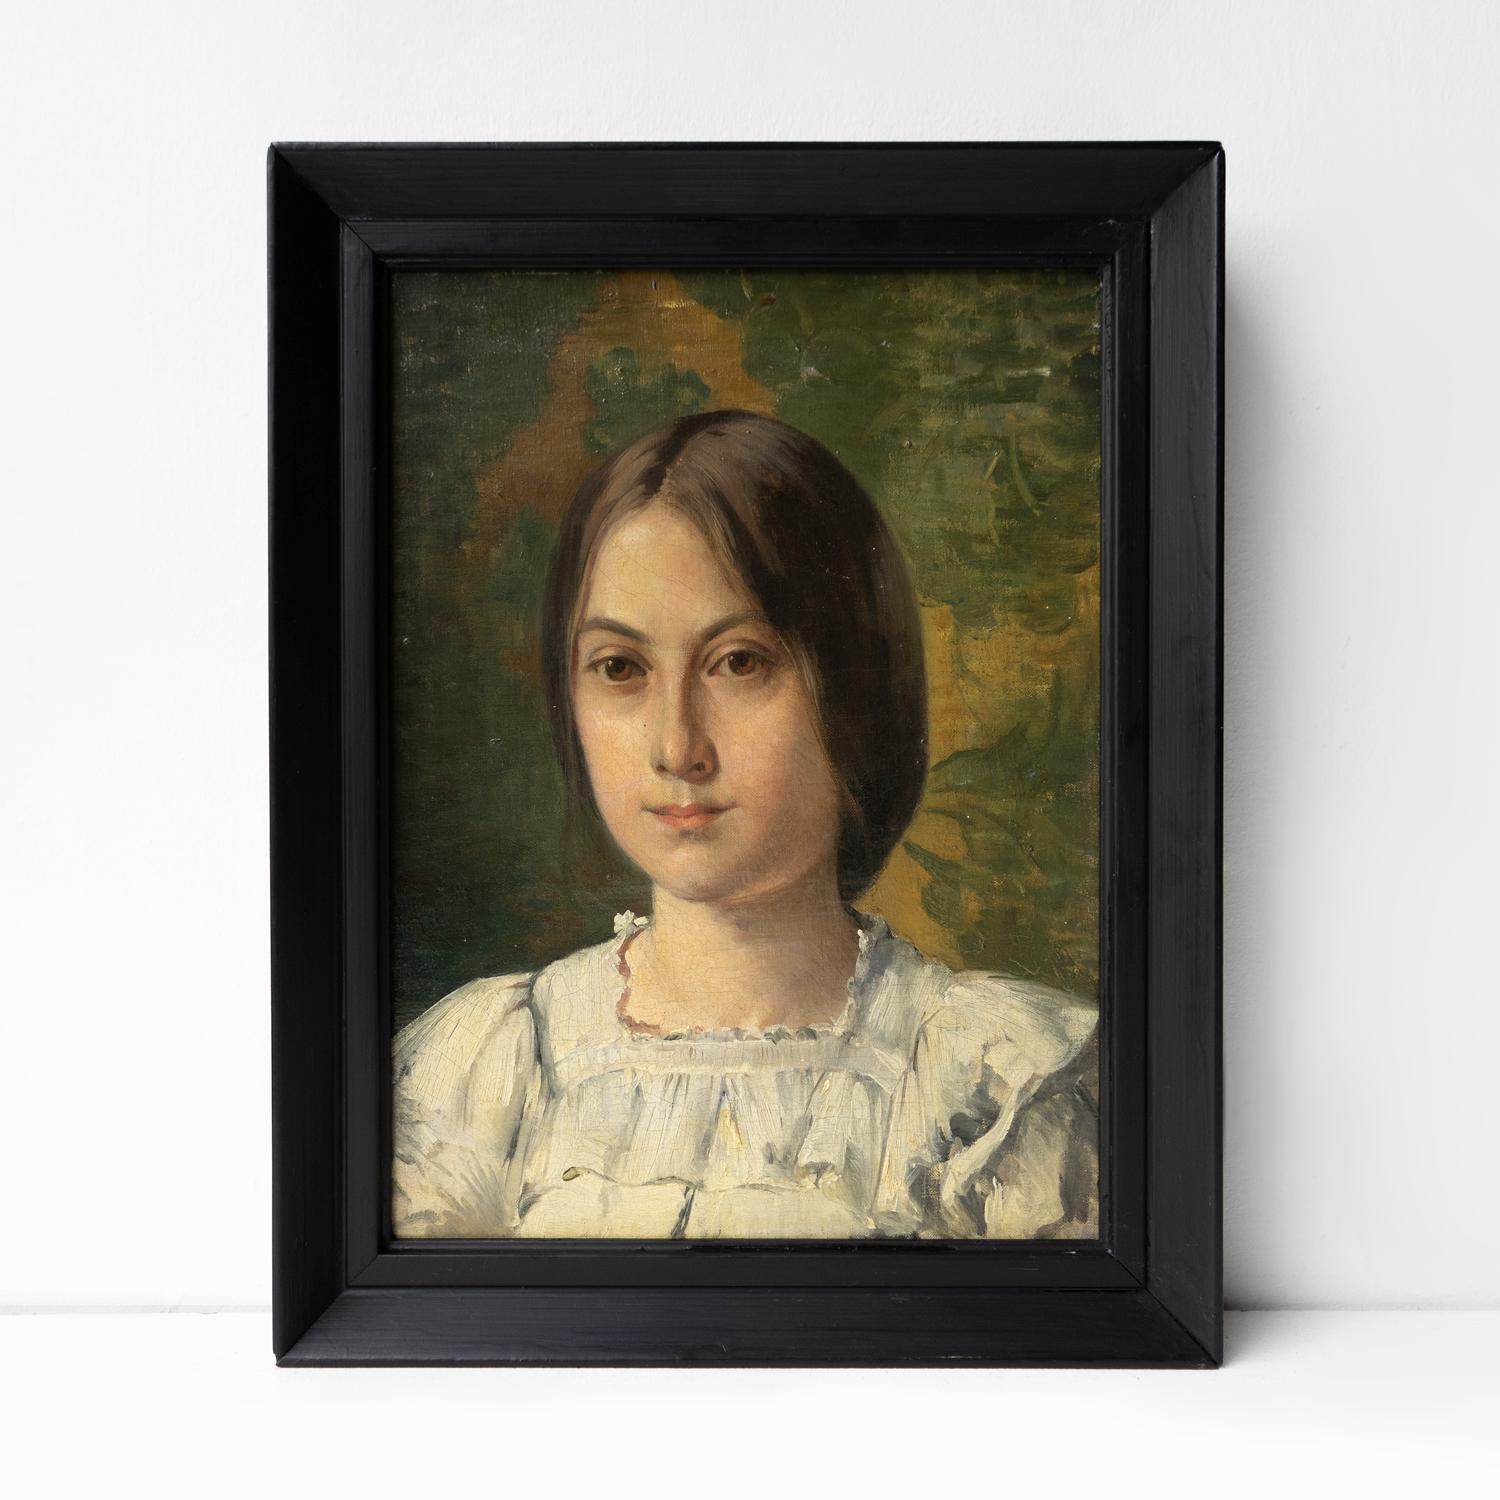 ANTIQUE ORIGINAL OIL ON CANVAS PAINTING DEPICTING A FEMALE SITTER

A captivating portrait depicting a young woman with a kind yet powerful face dressed in white and against a green-mottled background. She is full of character. 

The painting is